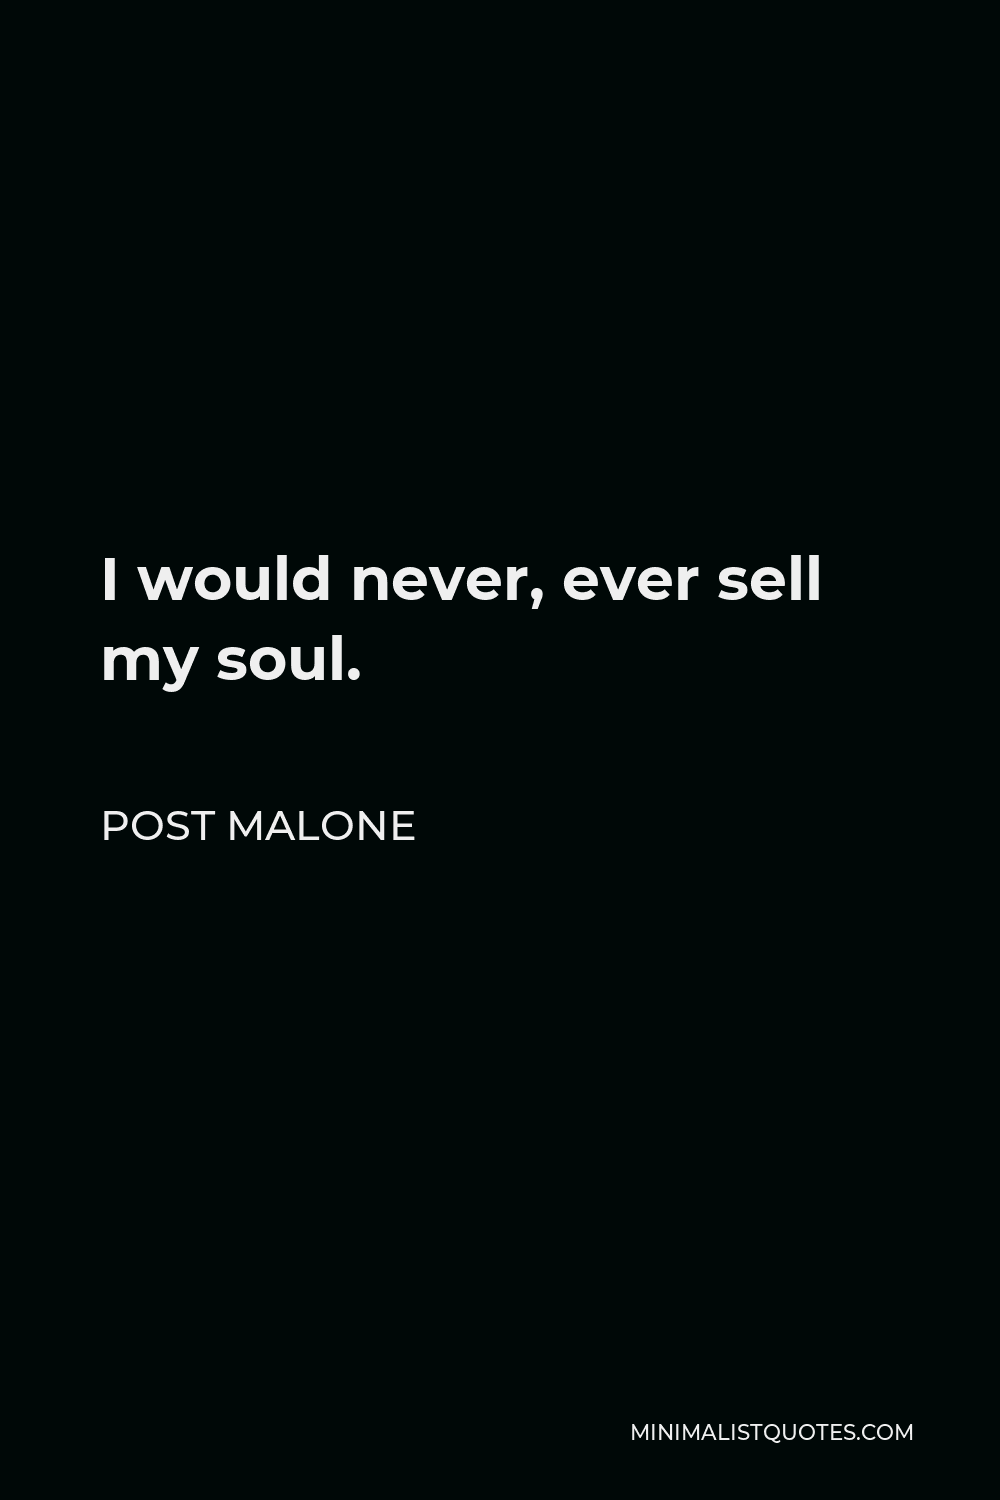 Post Malone Quote - I would never, ever sell my soul.